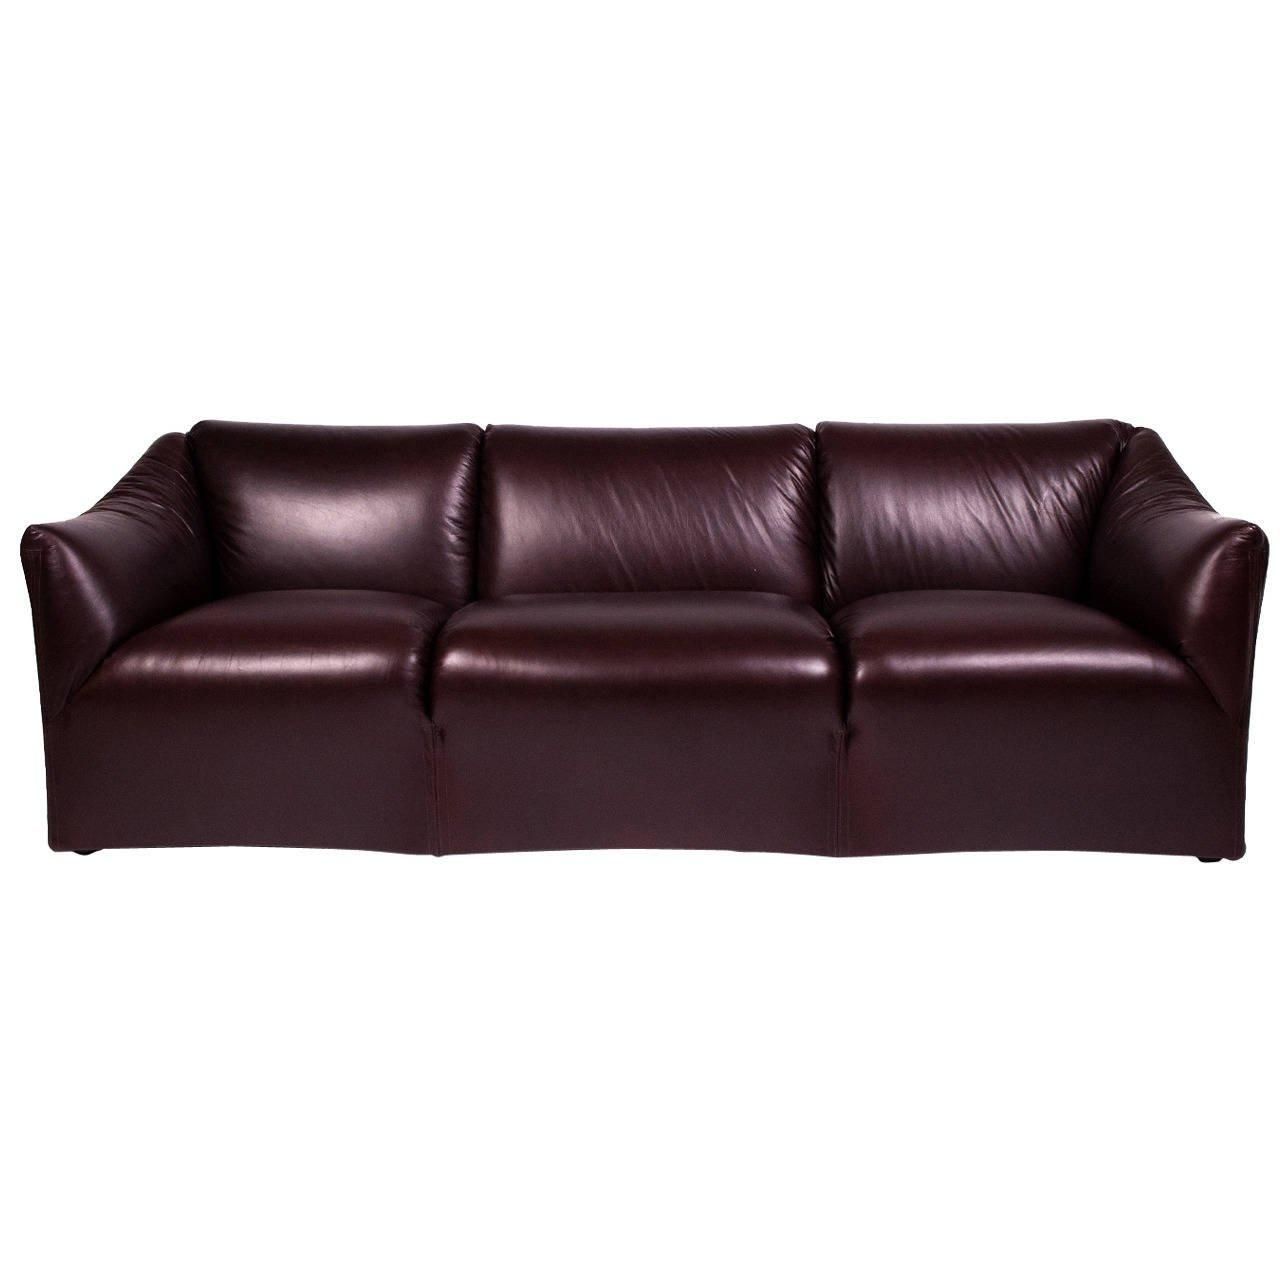 Mario Bellini Sofas – 14 For Sale At 1Stdibs Regarding Bellini Couches (View 18 of 20)